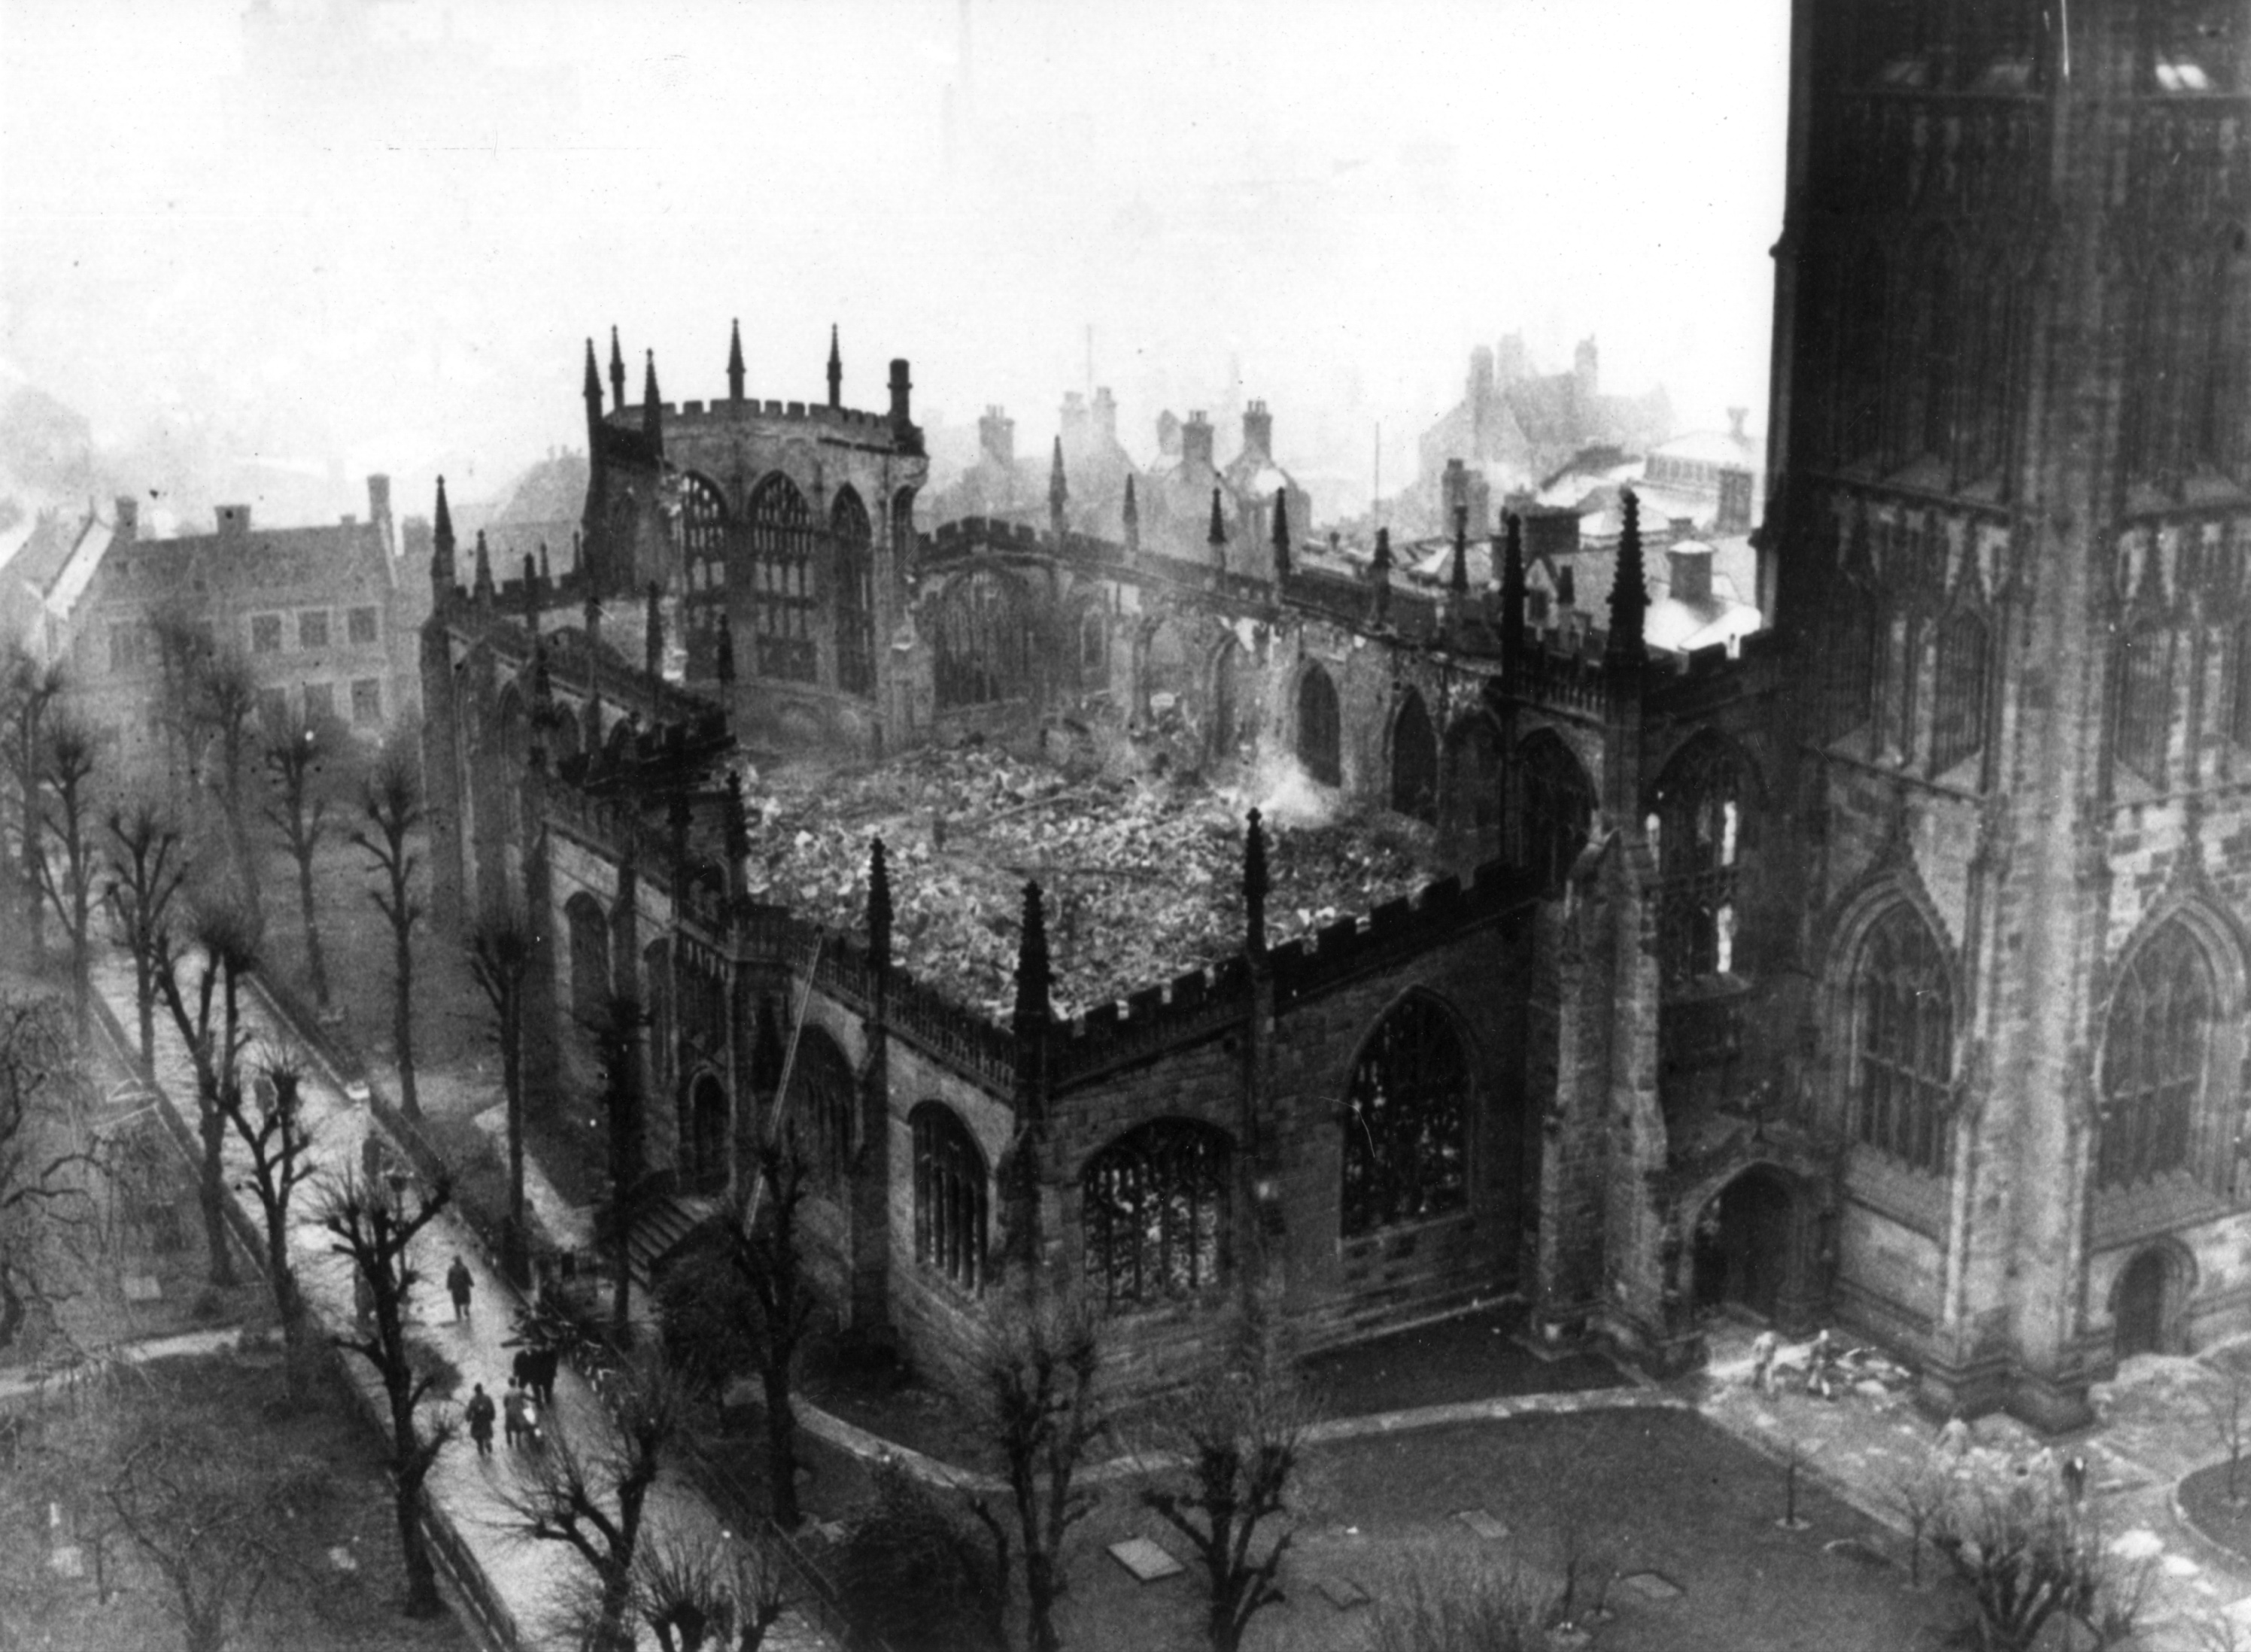 An aerial photograph of the ruined Coventry Cathedral in 1940